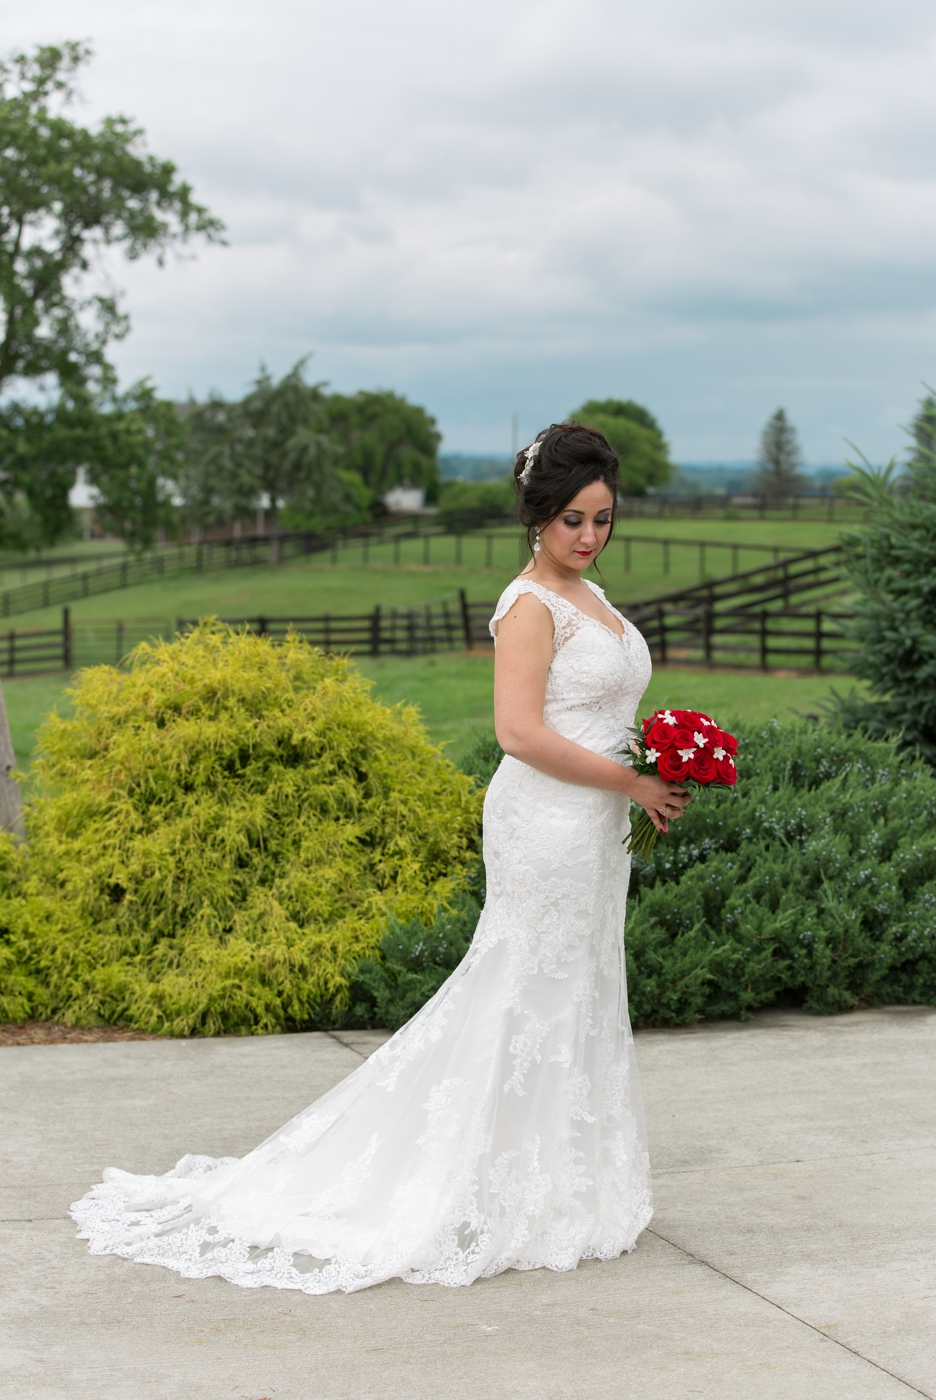 Hermitage Hill Farm and Stables wedding